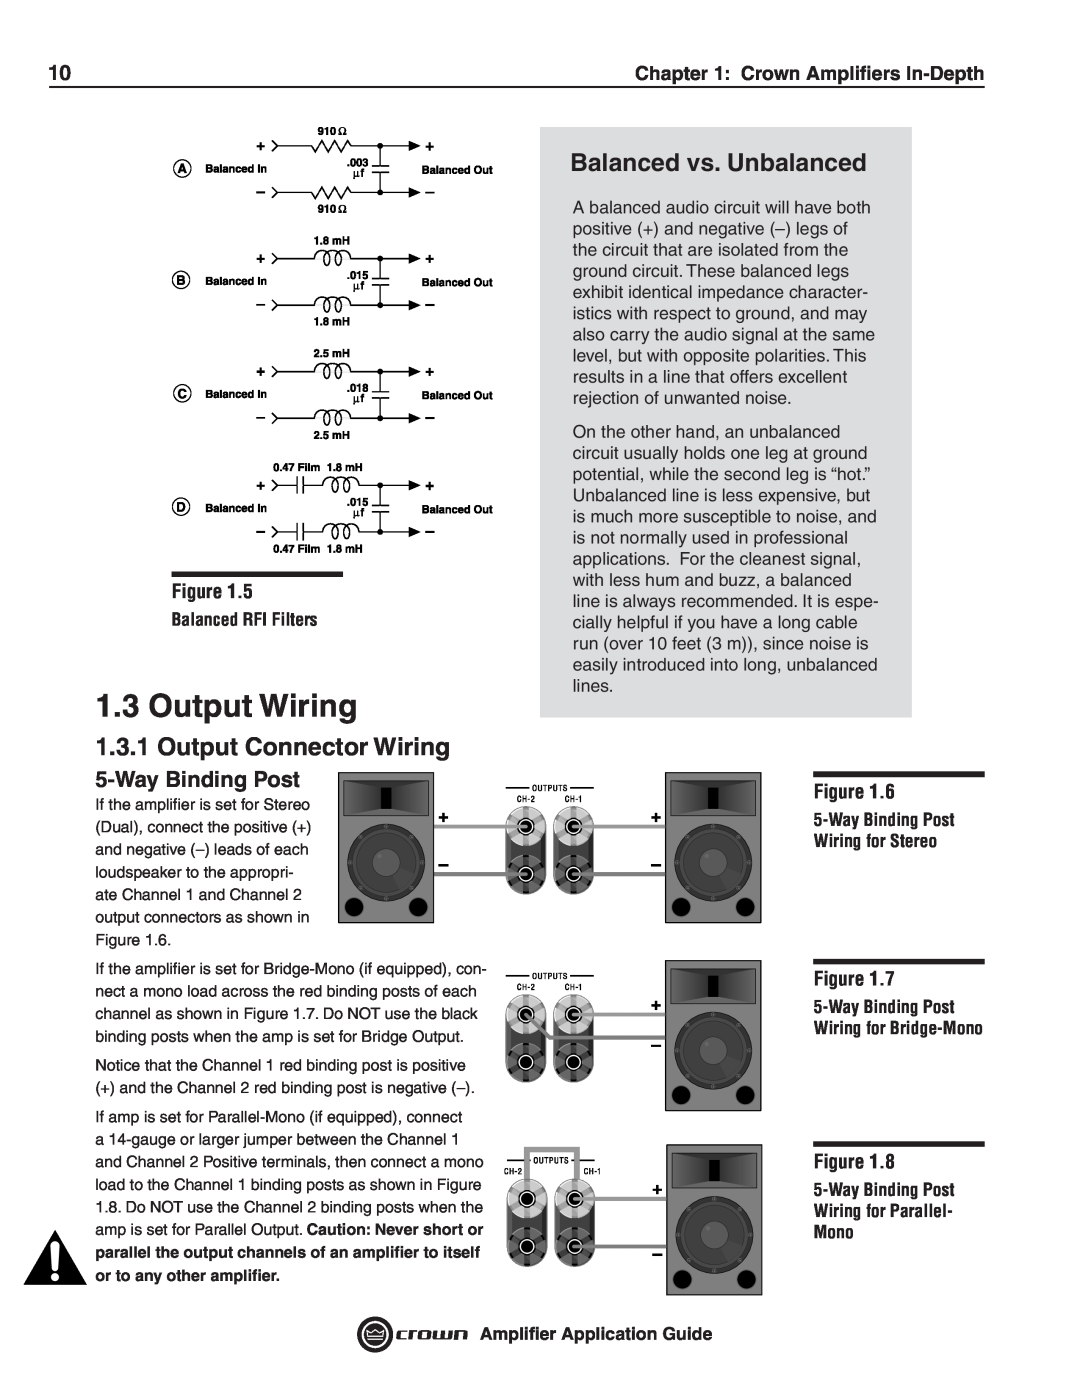 Crown Audio 133472-1A manual Output Wiring, Output Connector Wiring, Balanced vs. Unbalanced, Crown Ampliﬁers In-Depth 